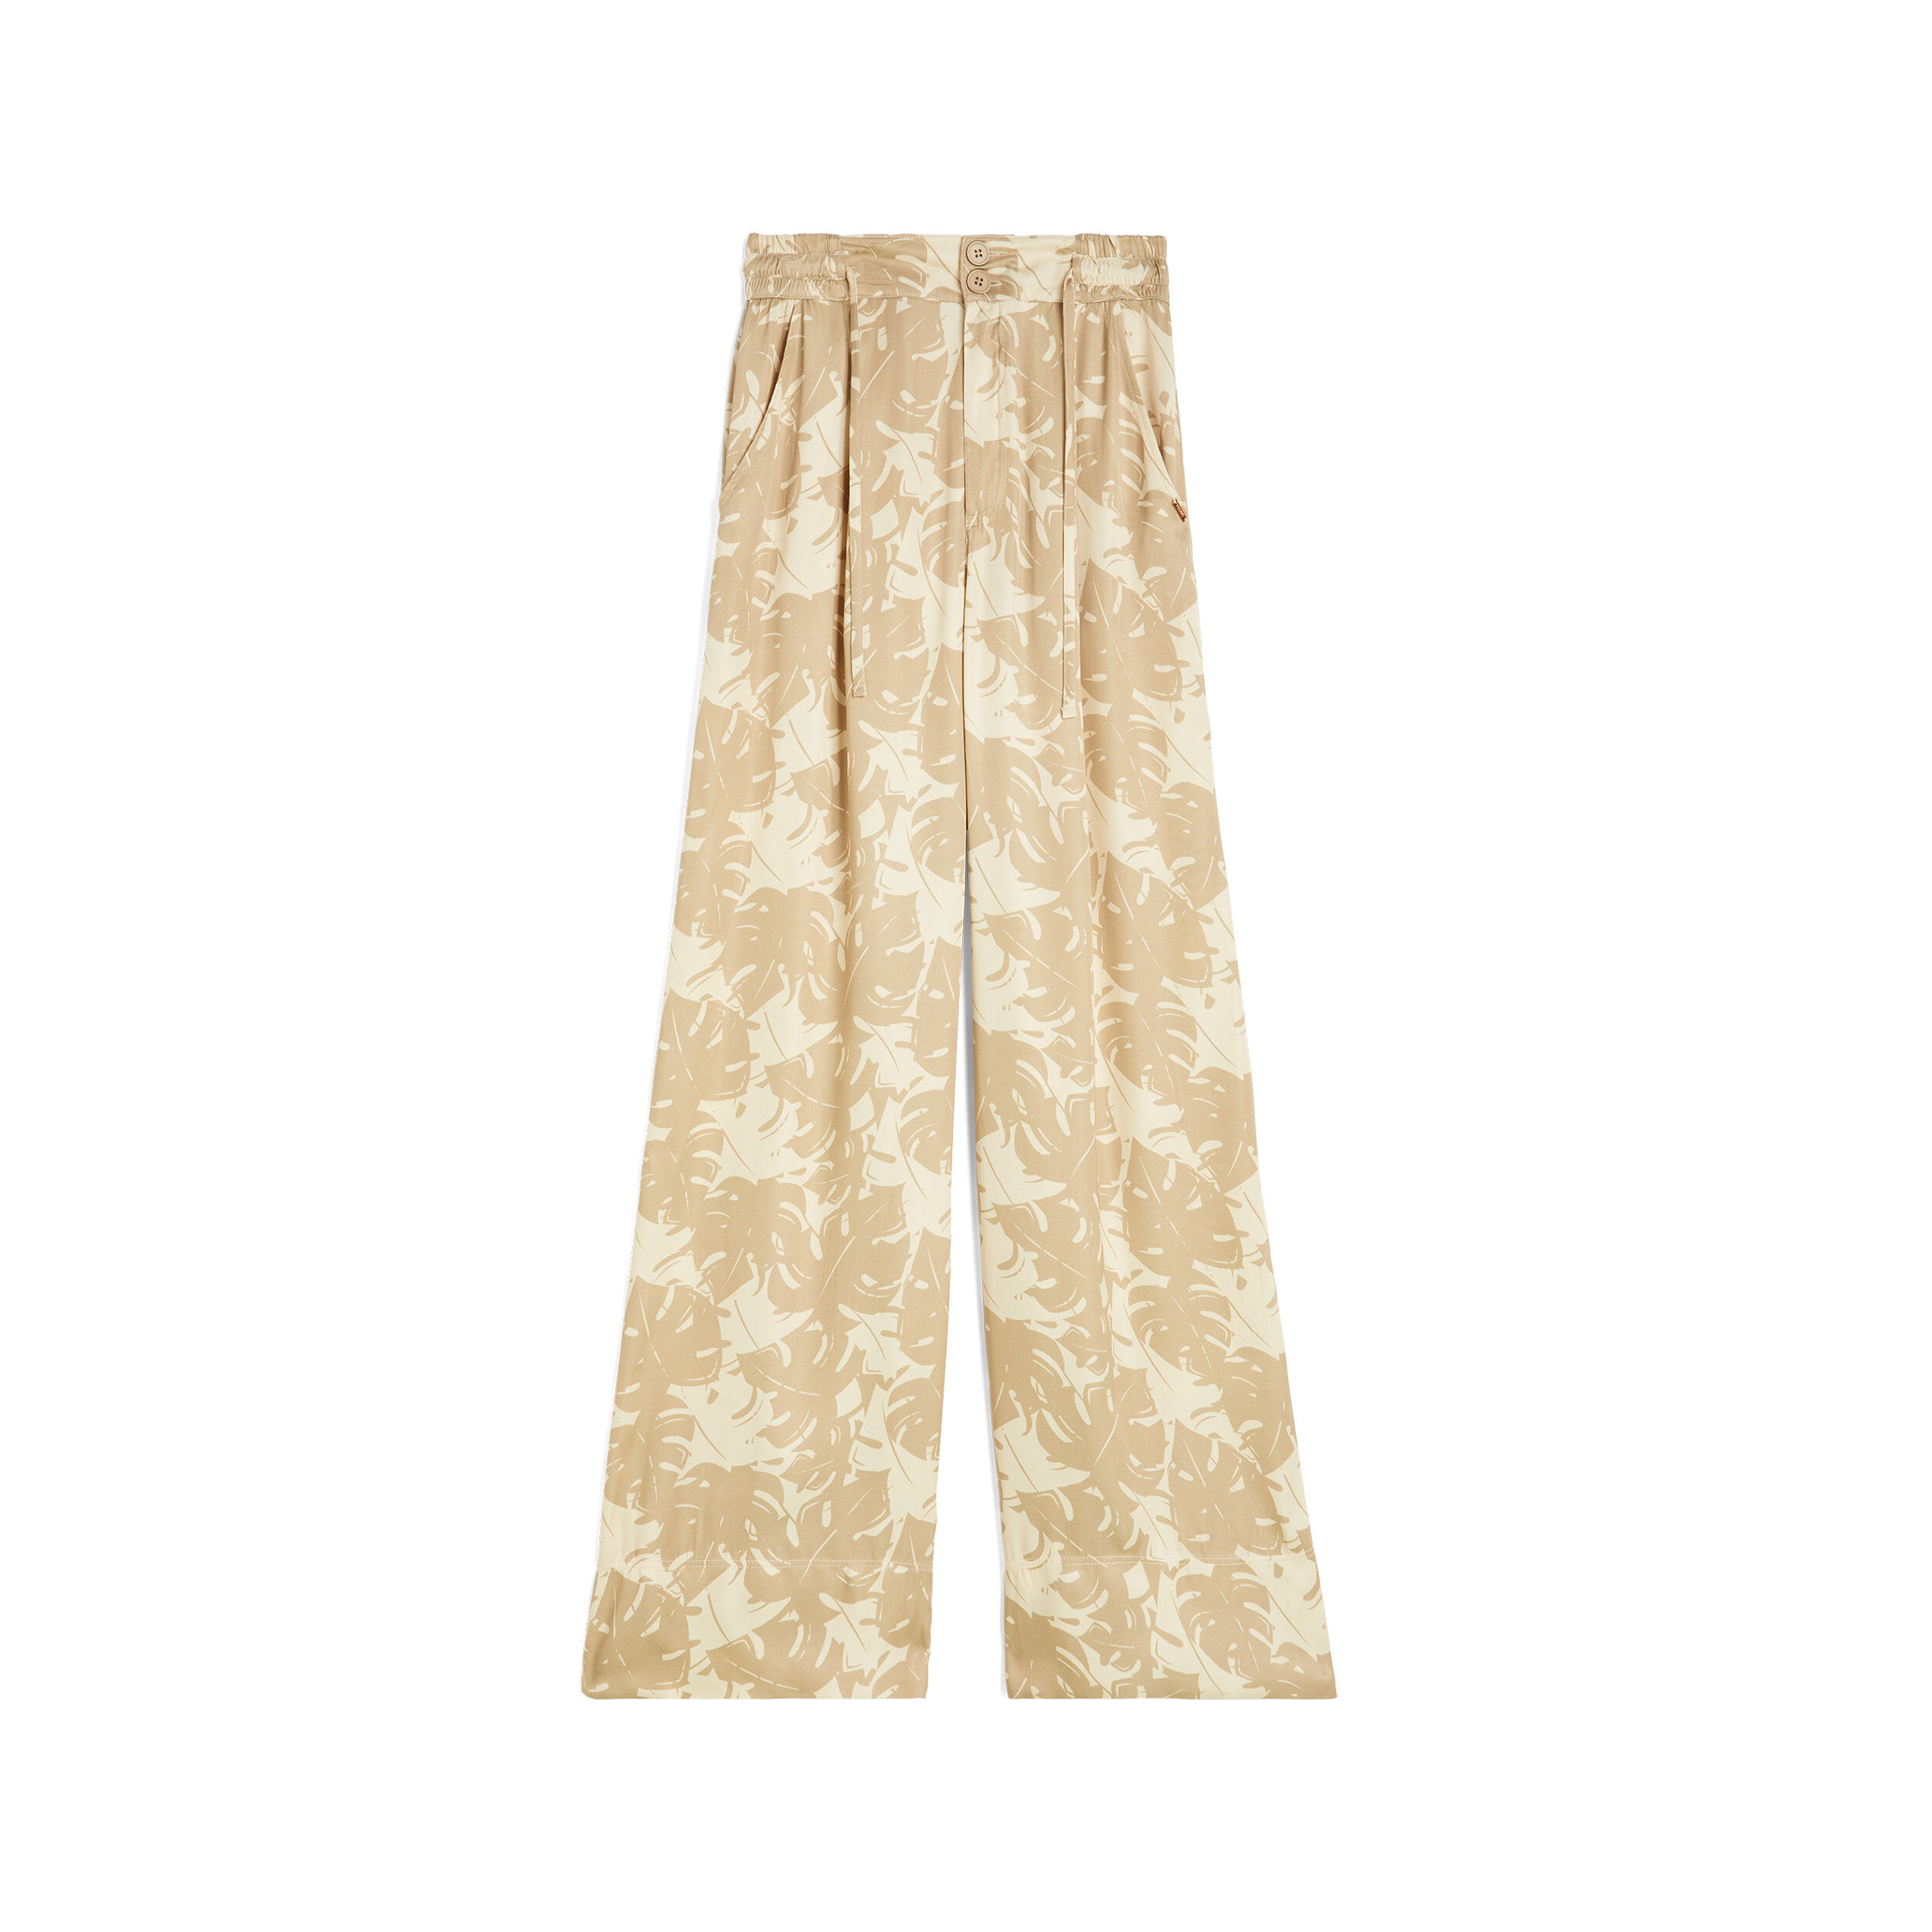 Freddy Pantaloni culotte gamba ampia in viscosa stampa tropical Beige And White Allover Flower Donna Large